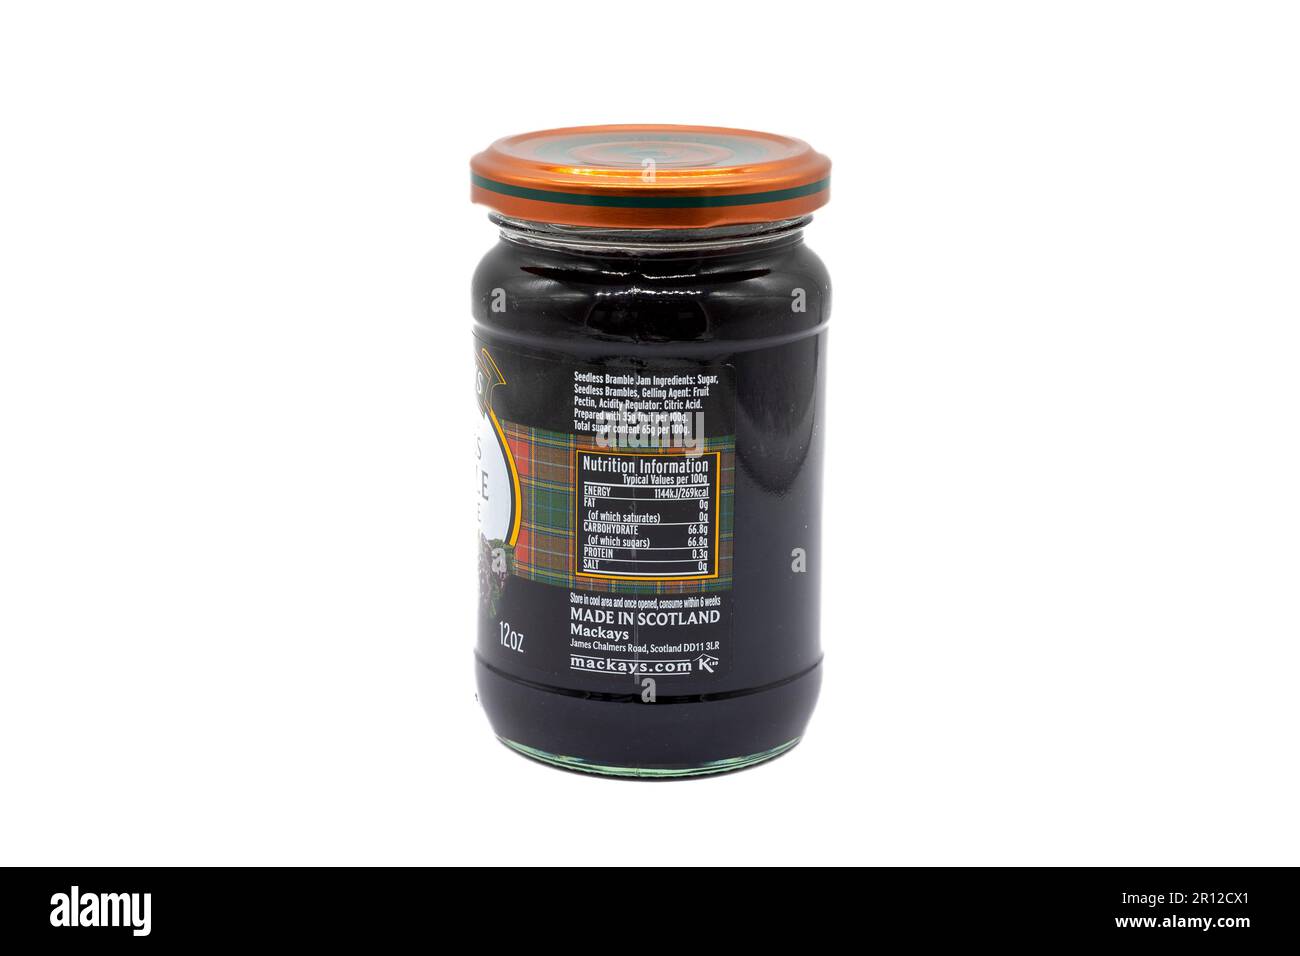 Irvine, Scotland, UK - February  02, 2023: Mackays branded seedless Bramble Preserve or jam in a glass Jar and metal lid that is fully recyclable and Stock Photo